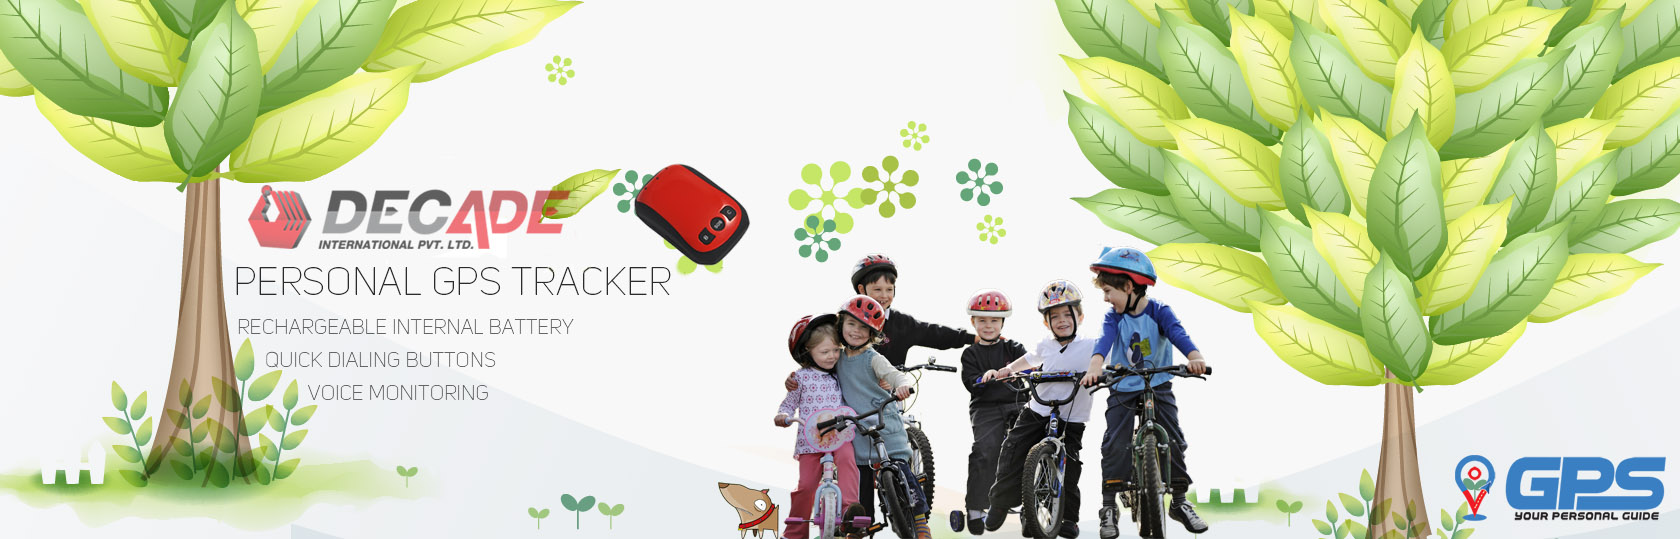 ALL / Position, Navigation &amp; satellite / GPS SYSTEM &amp; SOLUTIONS / PERSONAL GPS TRACKER